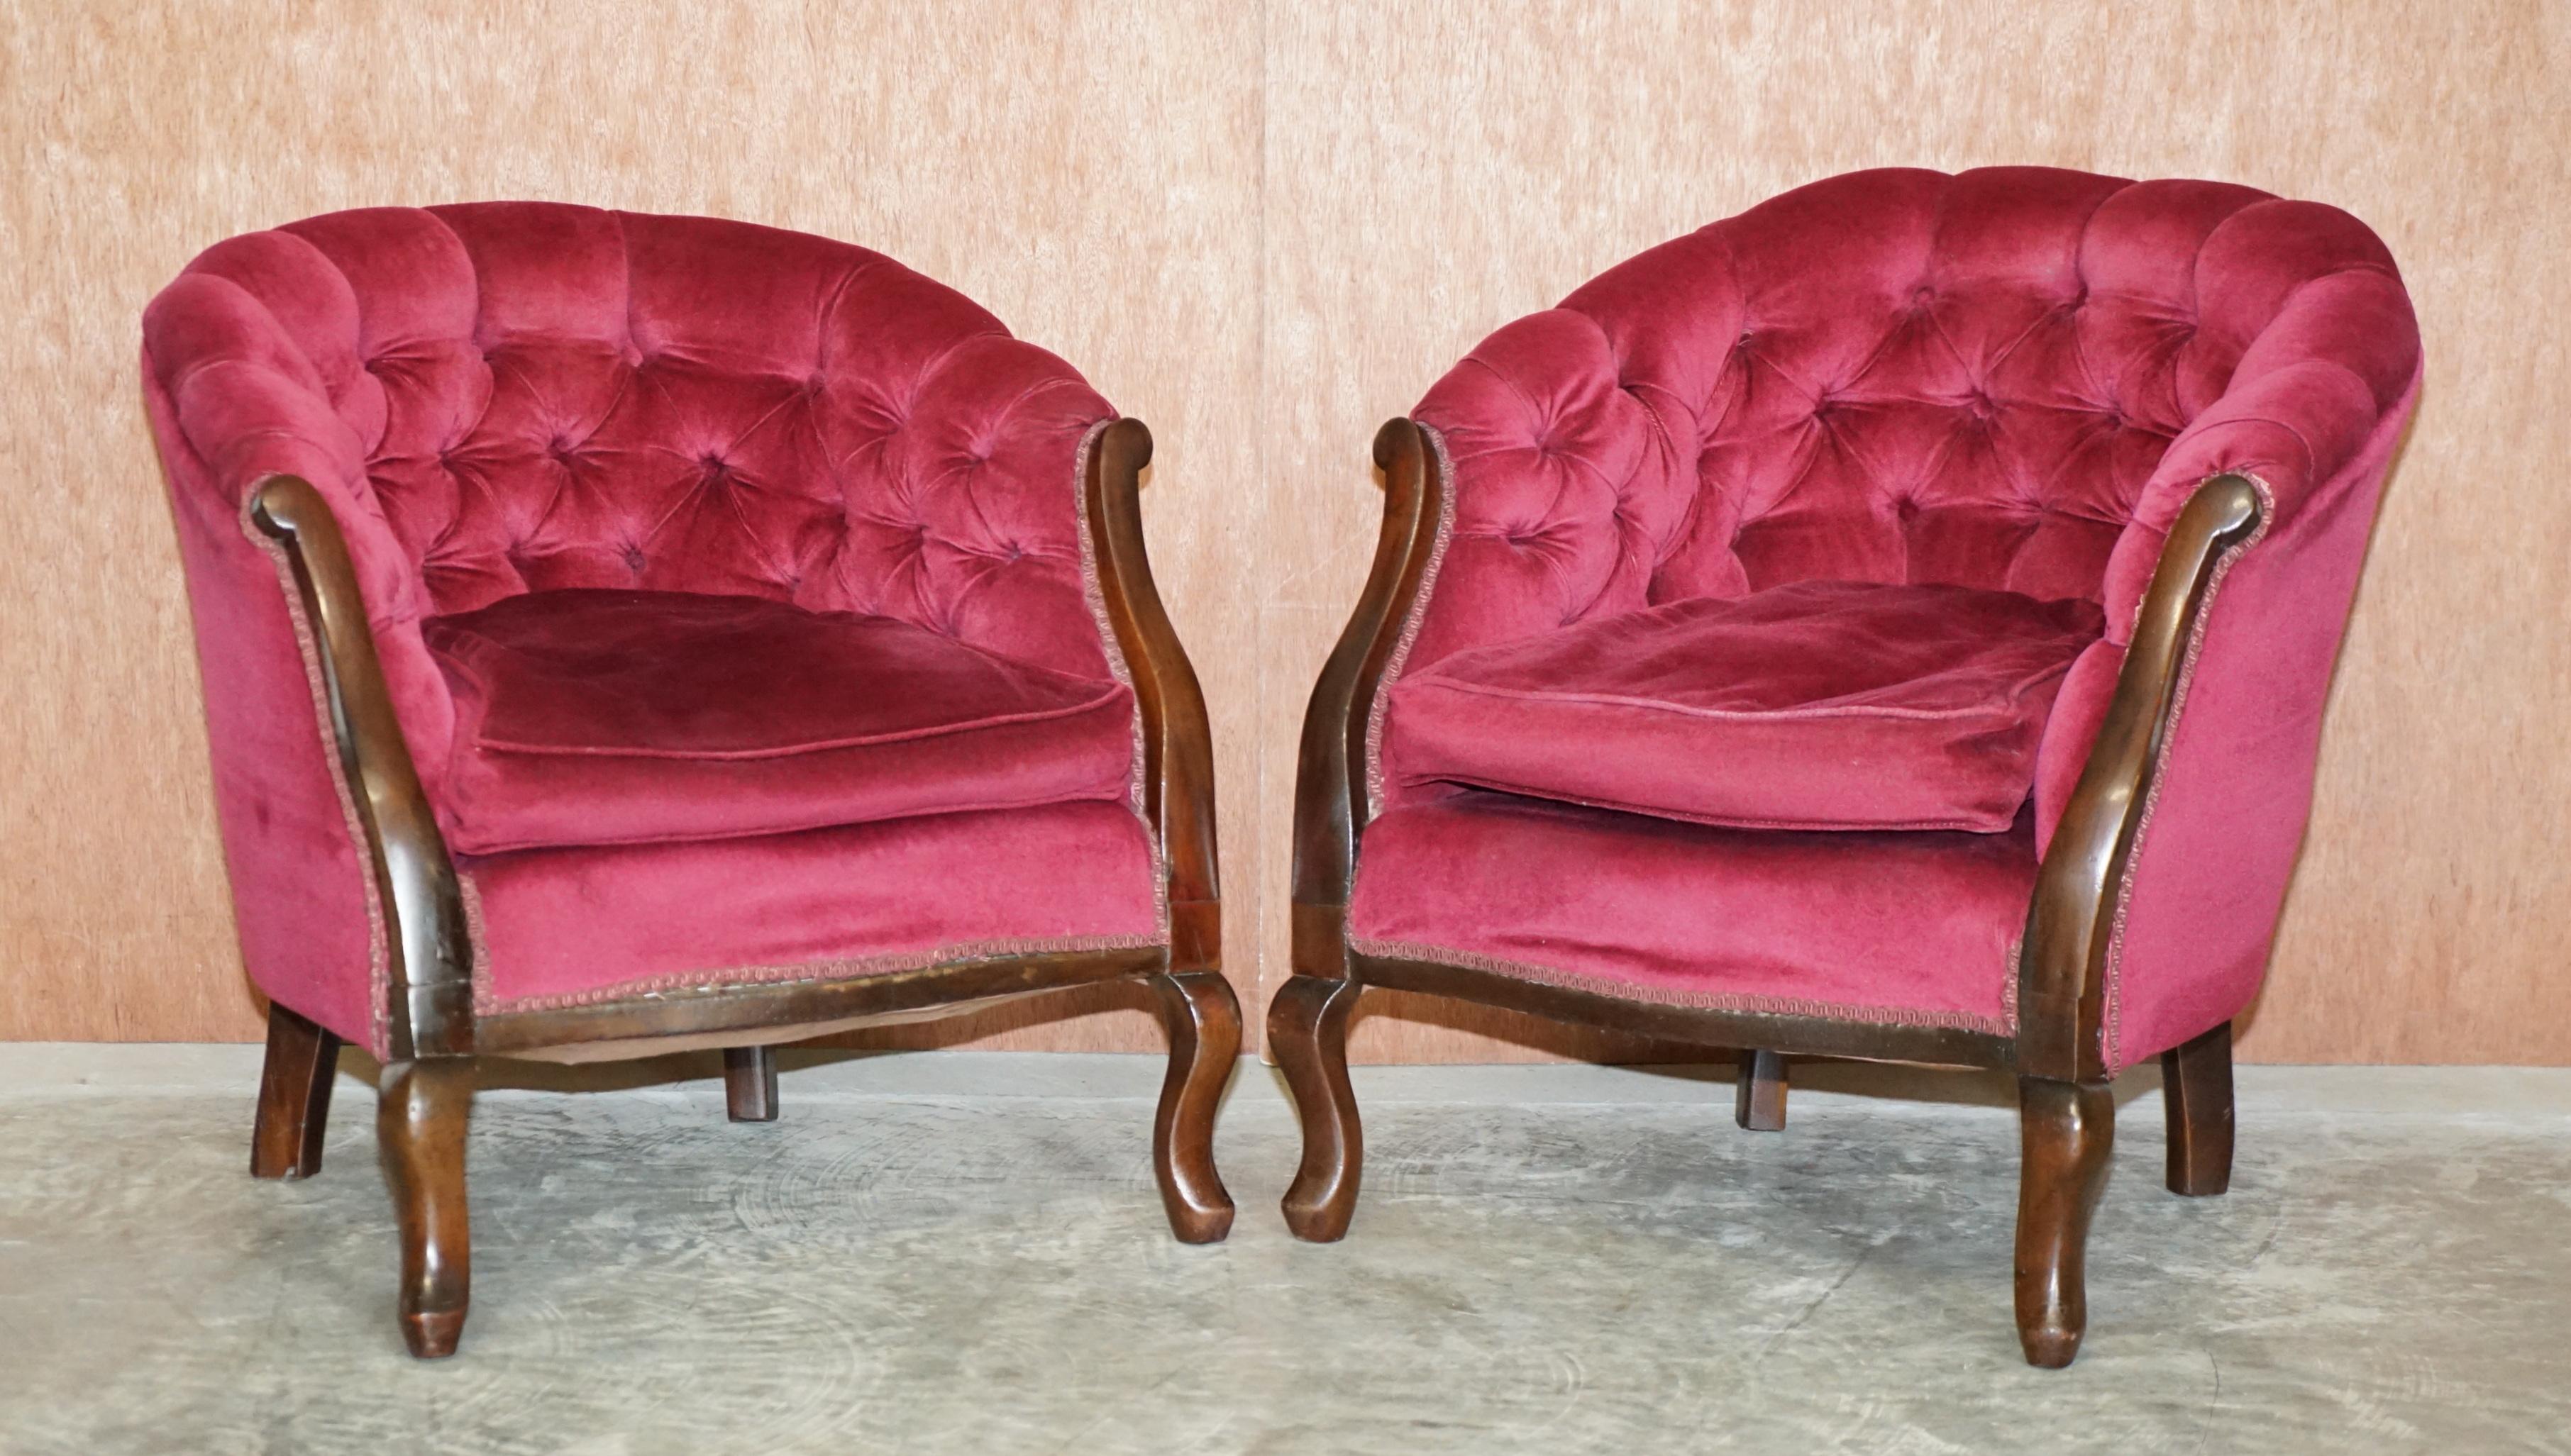 We are delighted to offer for sale this lovely Victorian Chesterfield tufted pink Velour and Mahogany parlour suite of seating 

A very elegant and well made suite, the frames are mahogany and the upholstery a pink velour, these are very